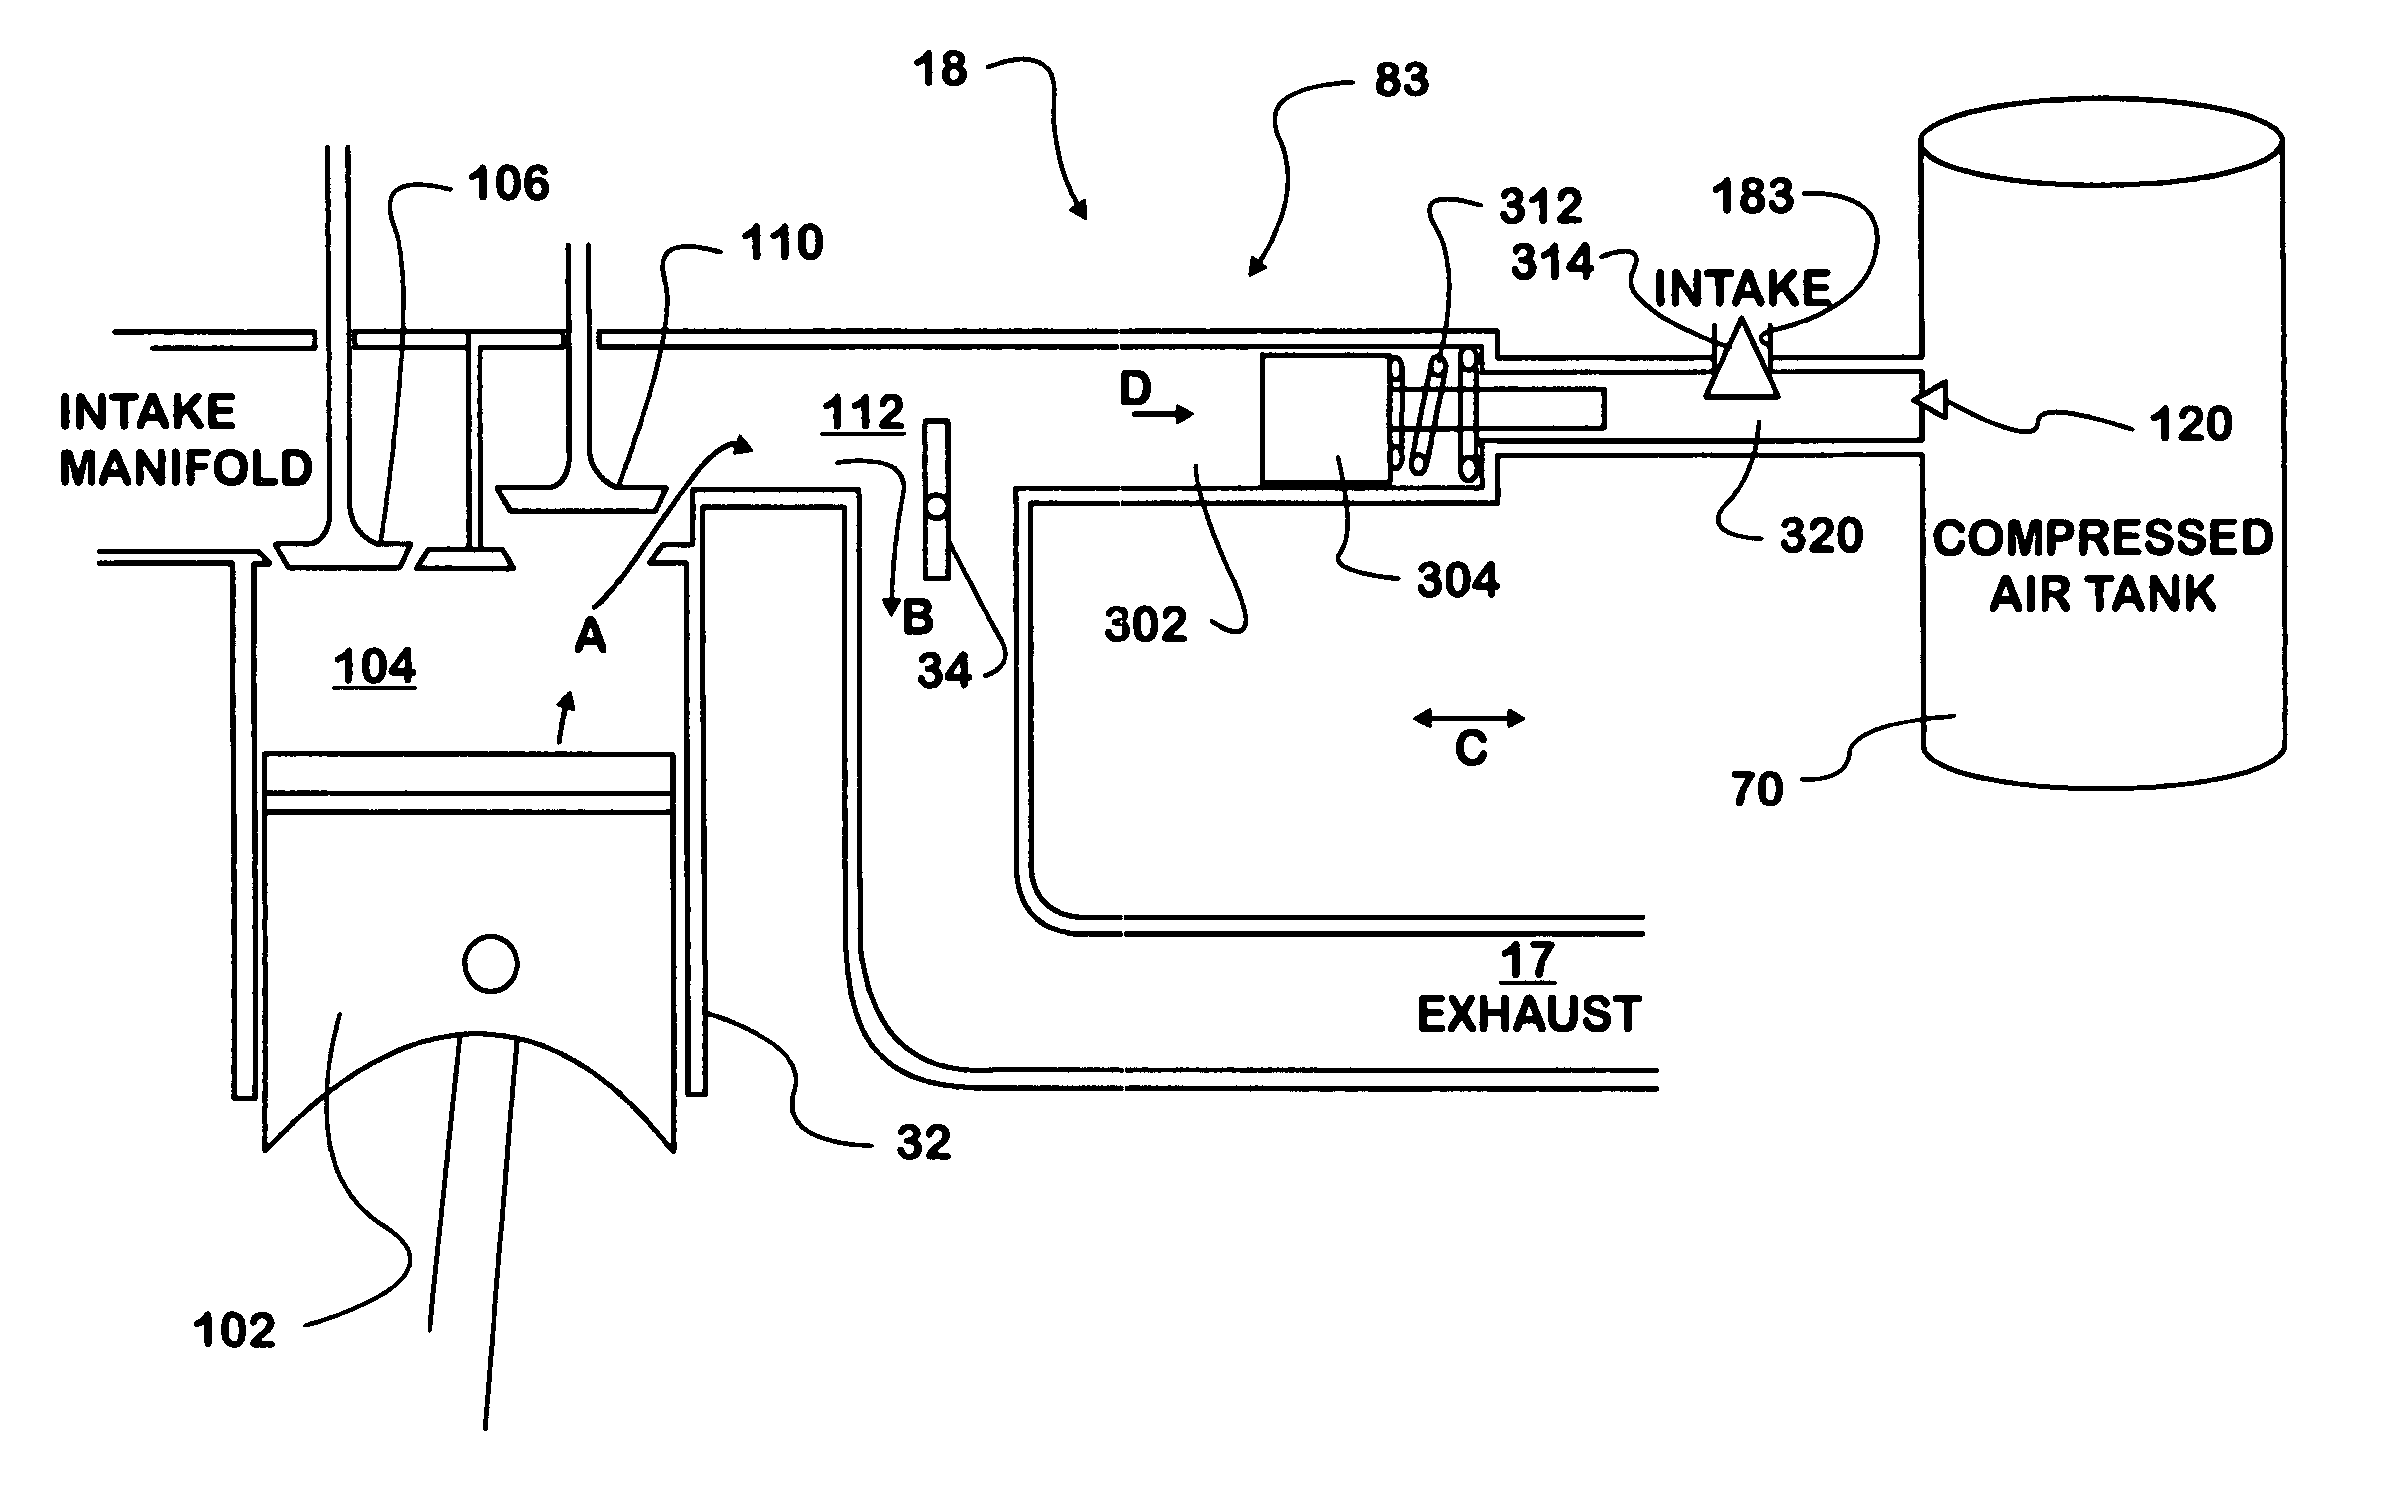 Engine based kinetic energy recovery system for vehicles